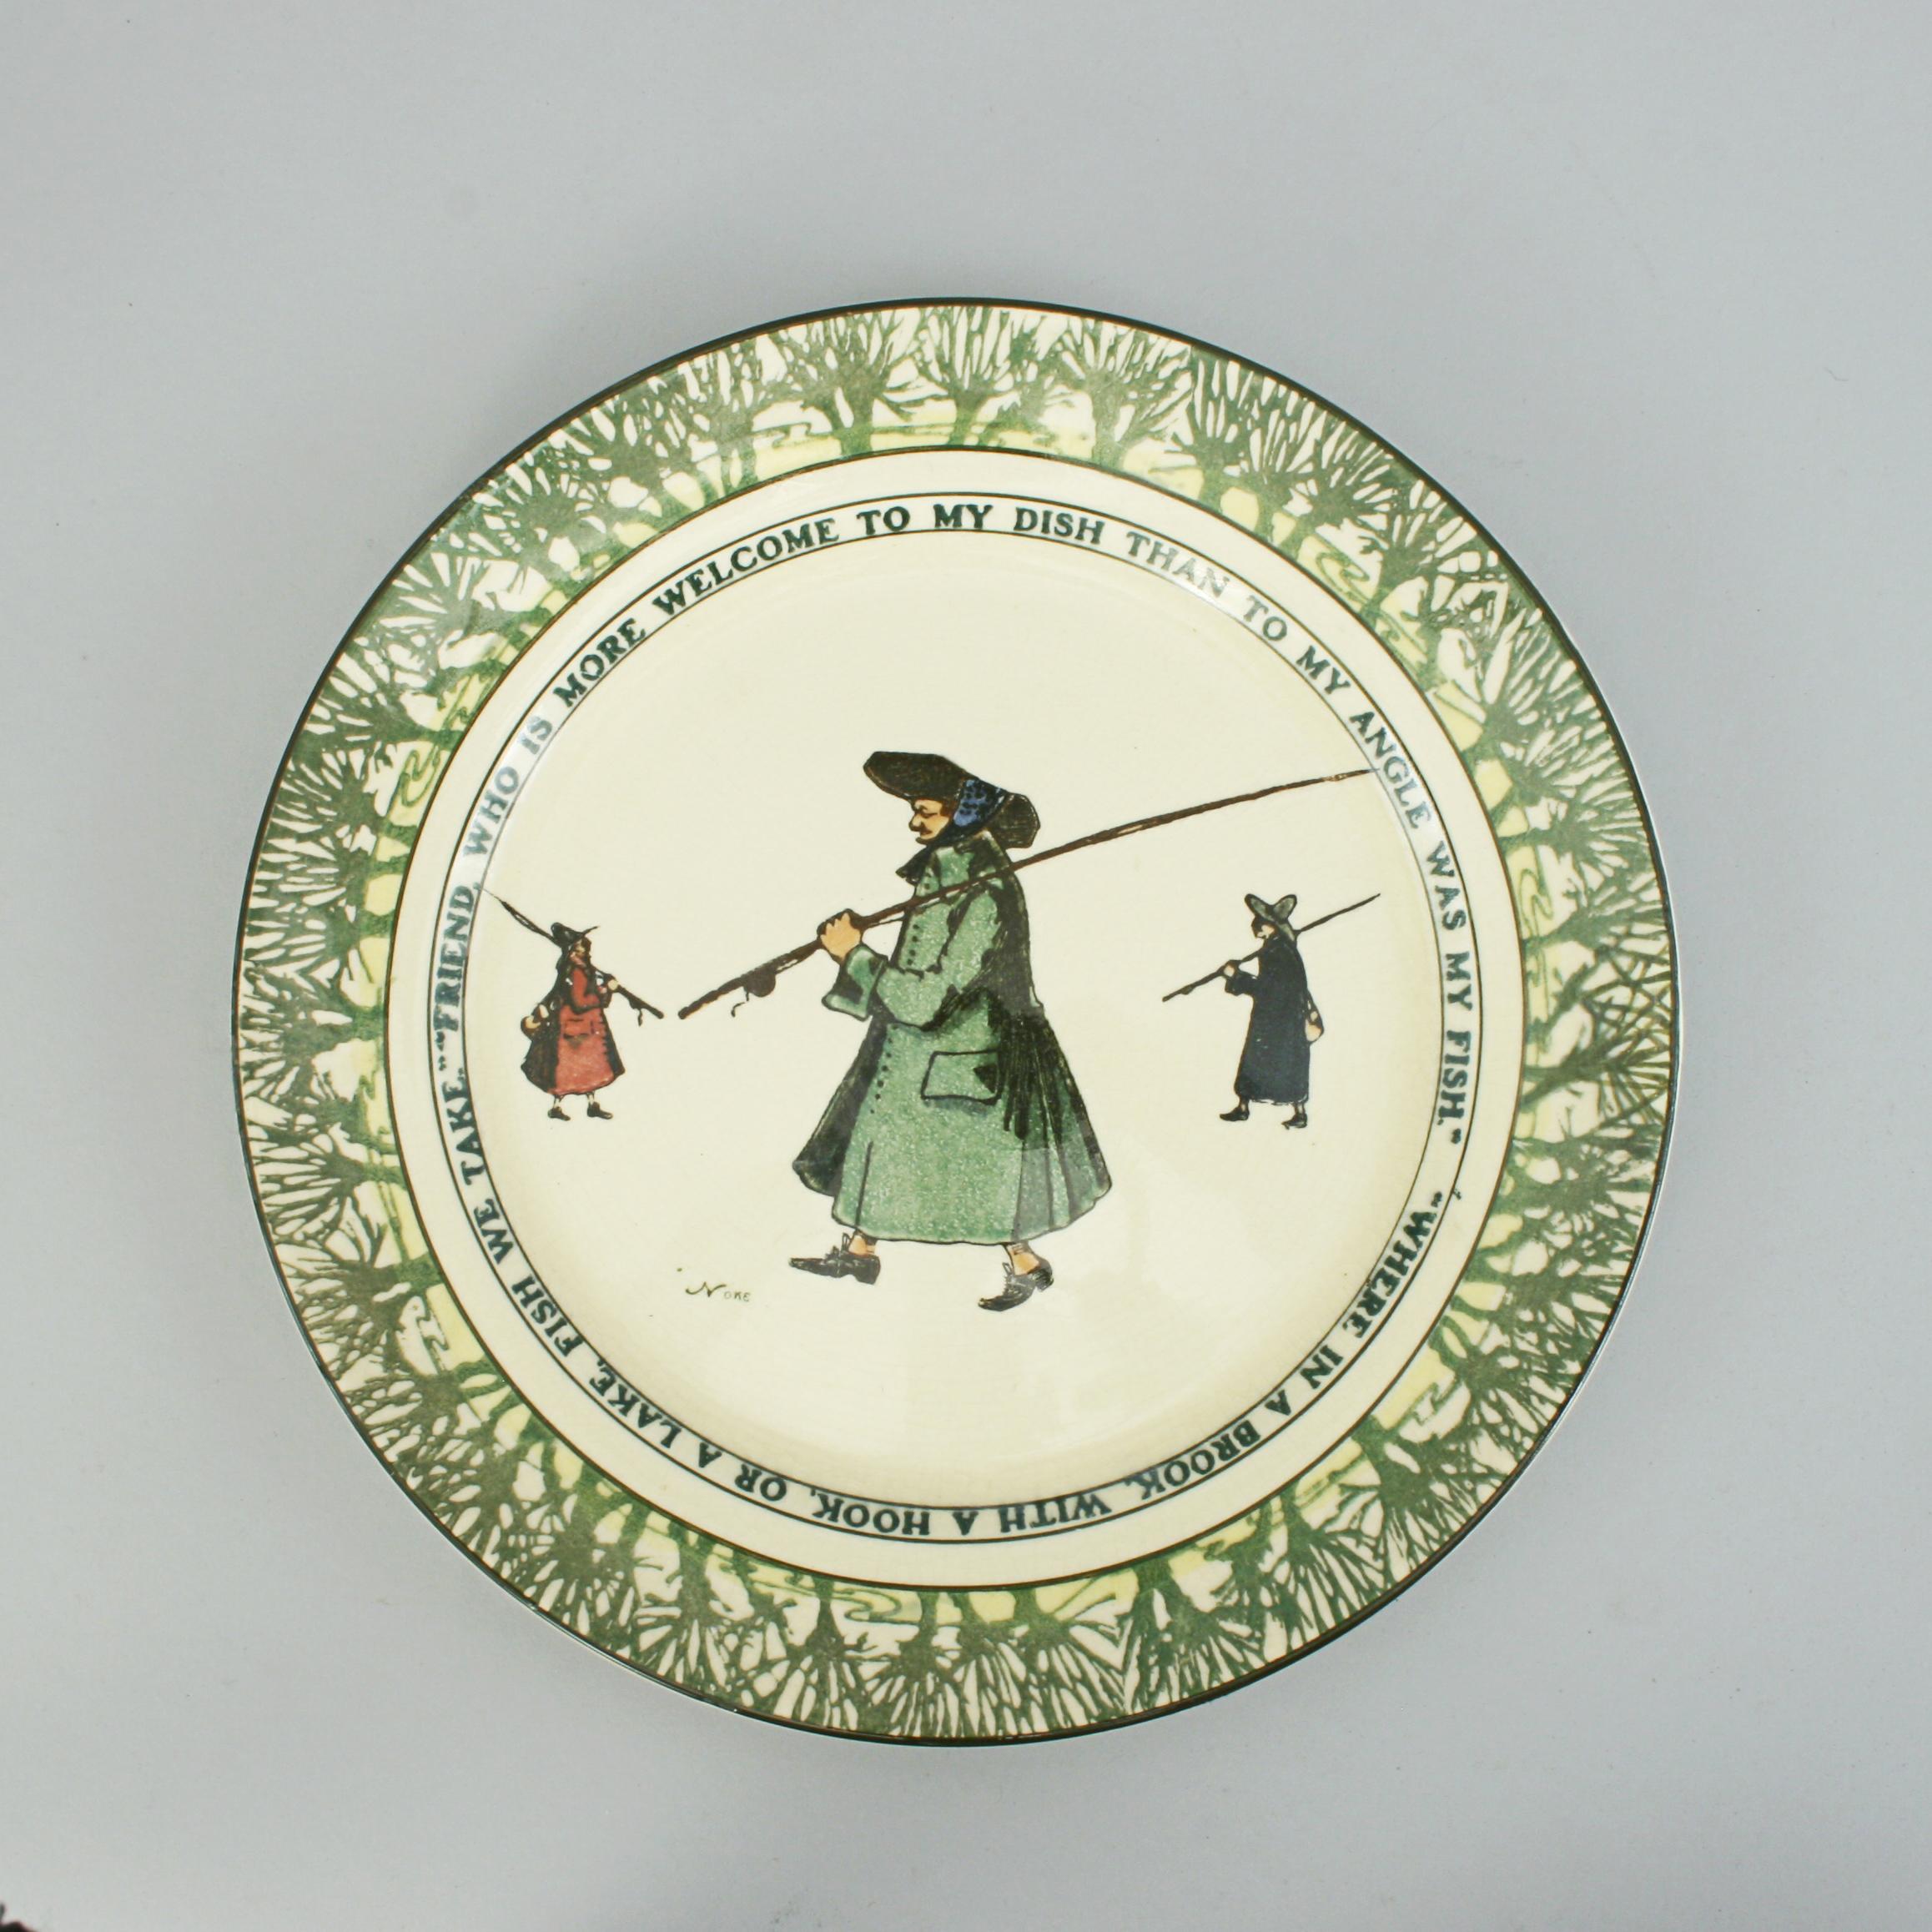 Vintage fishing plate by Royal Doulton.
A good Royal Doulton plate decorated with Isaac Walton design fishing scenes with the inscription: FRIEND WHO IS MORE WELCOME TO MY DISH THAN TO MY ANGLE WAS MY FISH -
WHERE IN A BROOK, WITH A HOOK, OR A LAKE,